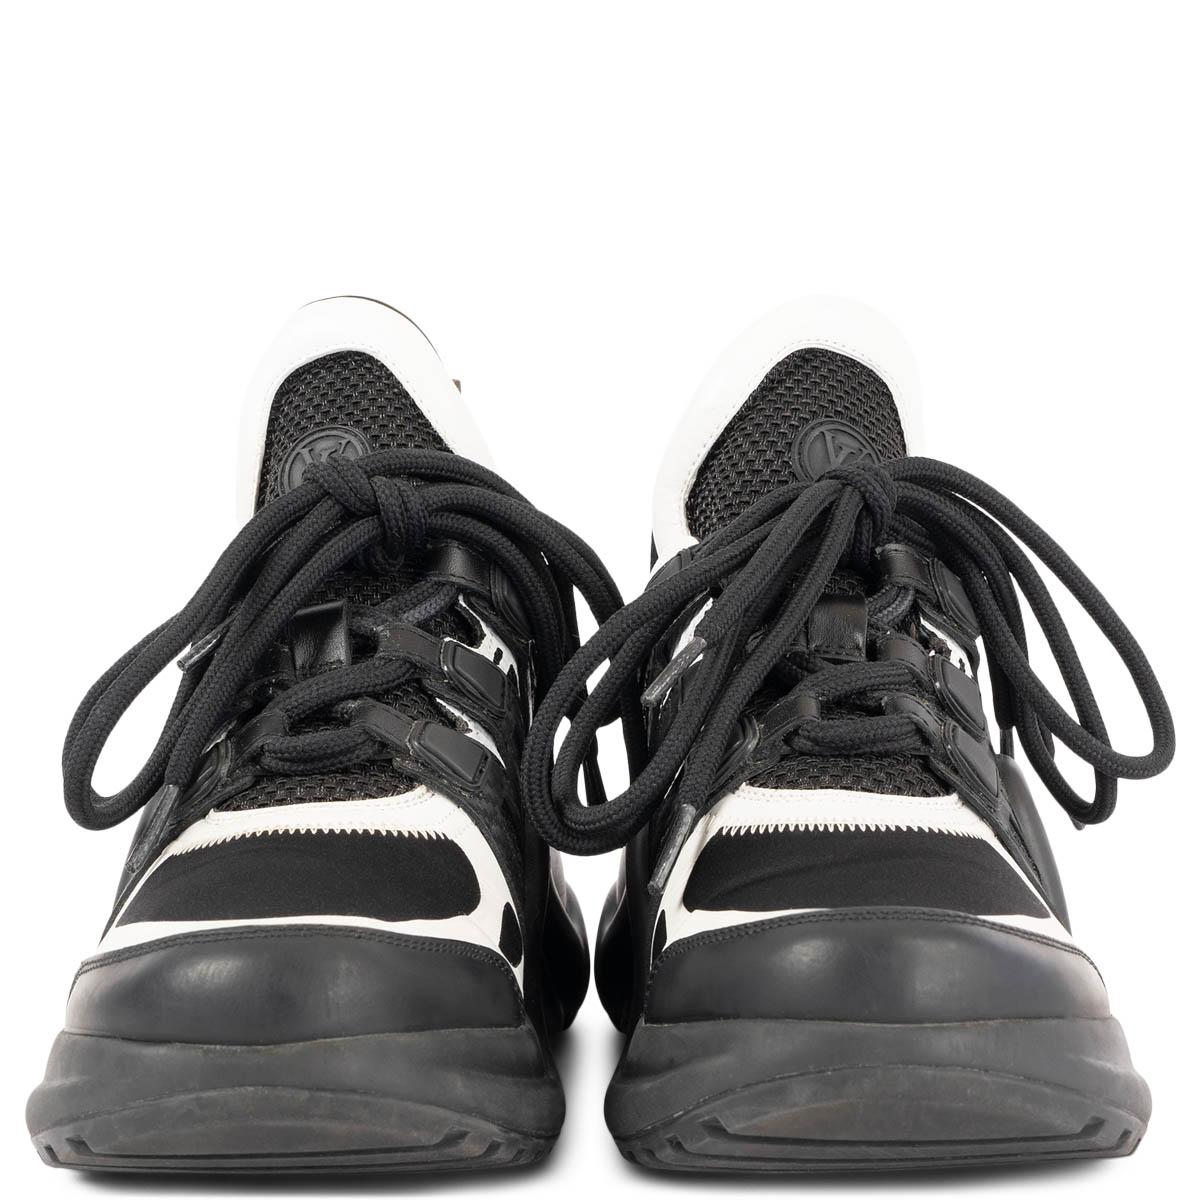 100% authentic Louis Vuitton Archlight sneakers in black mesh and technical fabric with white leather trimming. This sneaker is characterized by its oversized tongue and turbo outsole, which discreetly adds extra height. Monogram canvas pull sling